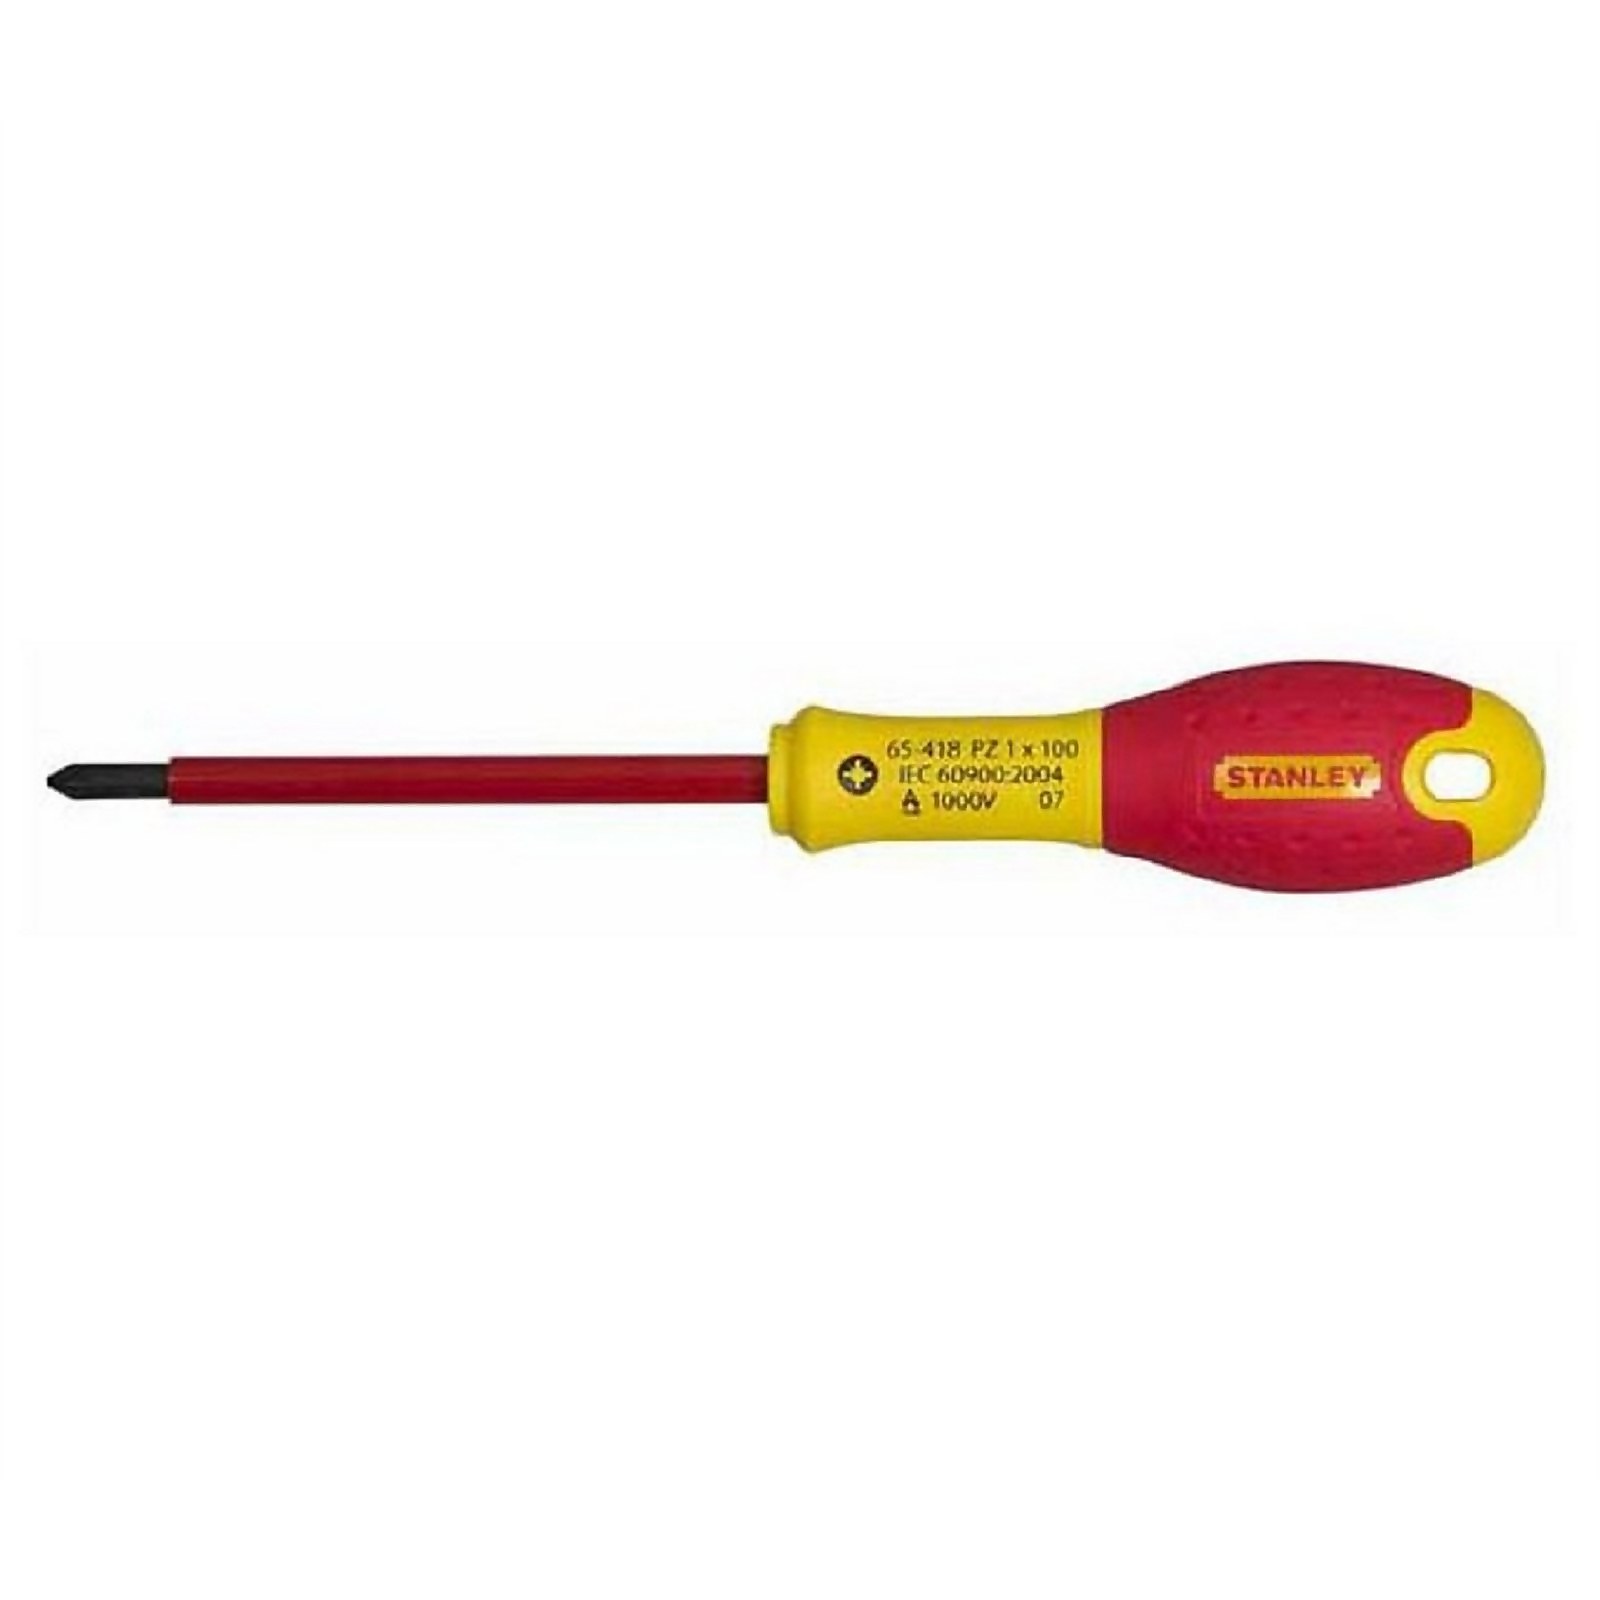 Photo of Stanley Fatmax Pozi Insulated Screwdriver - No1x100mm